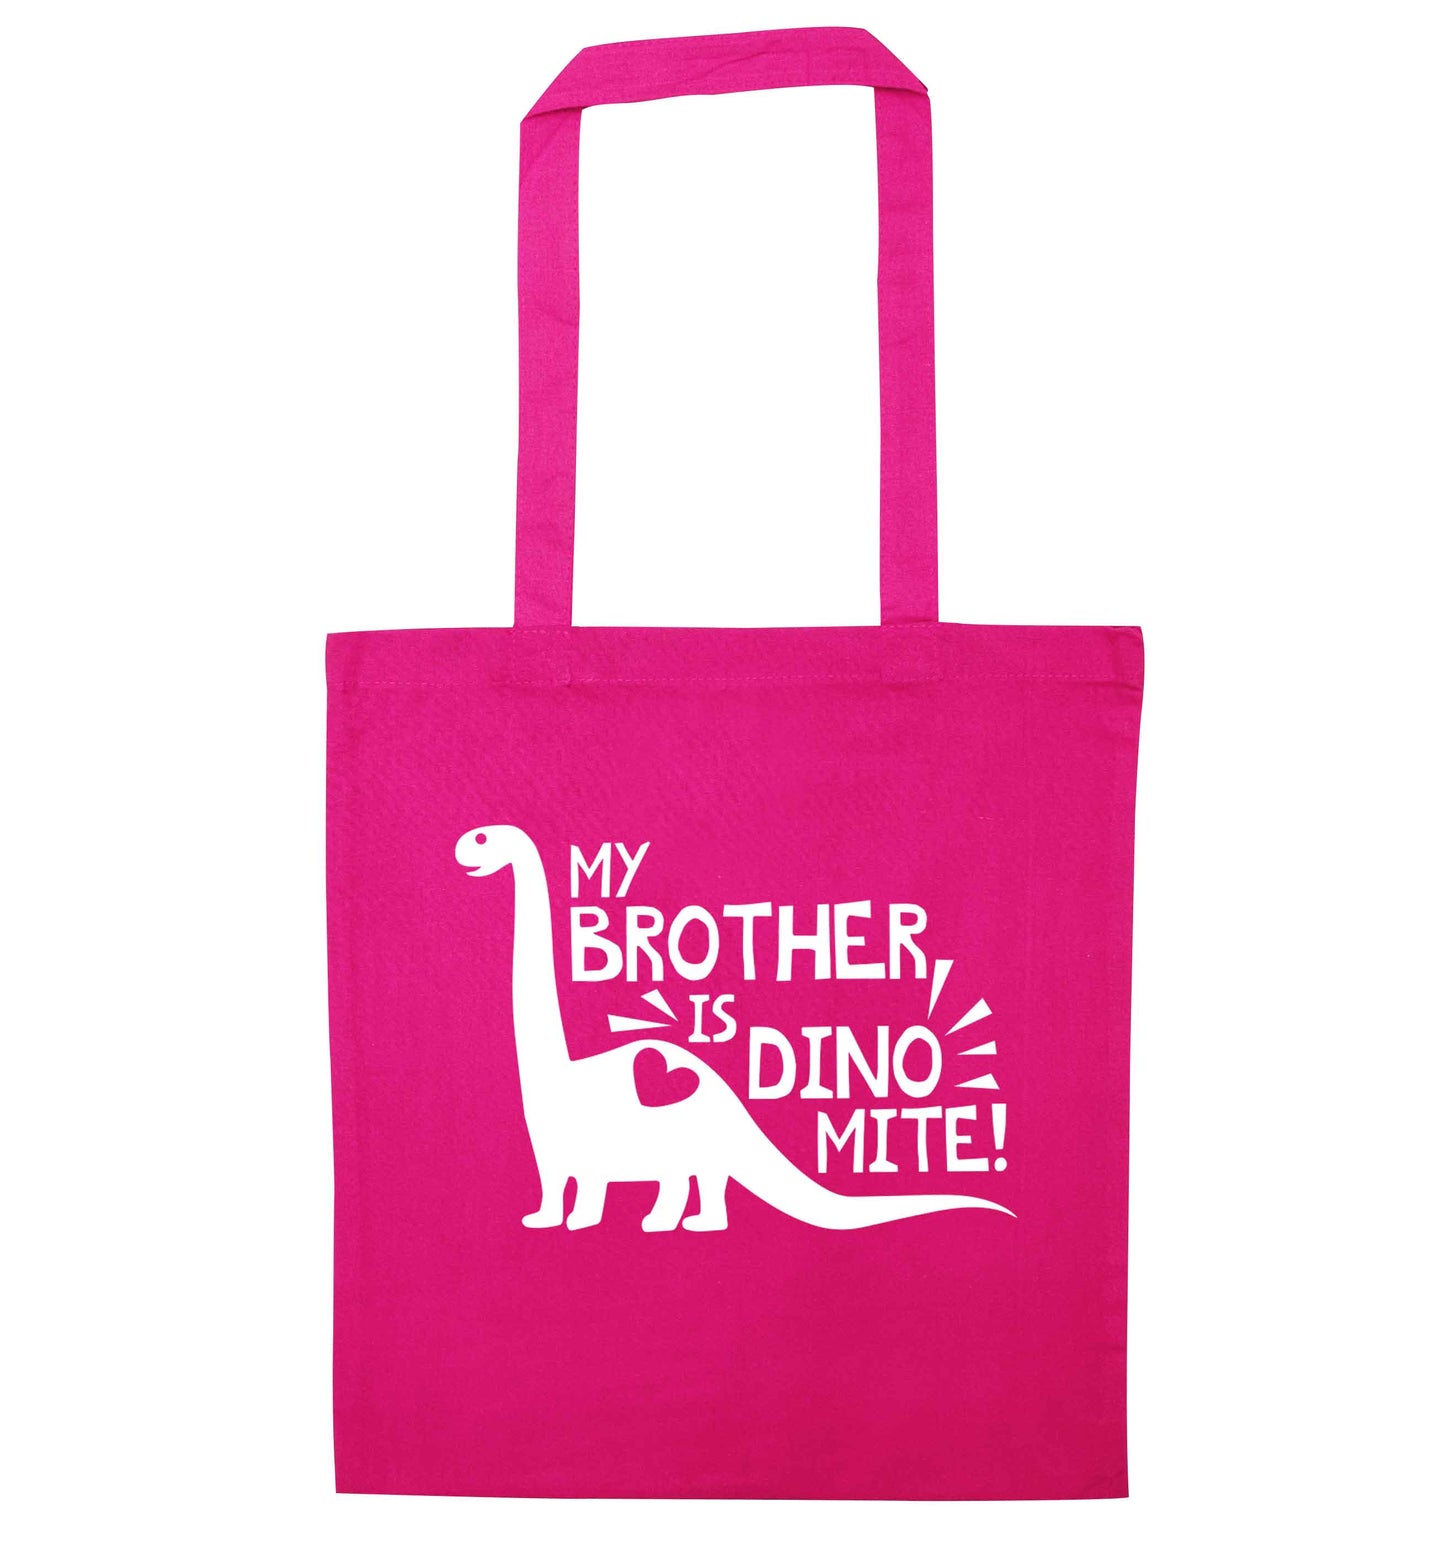 My brother is dinomite! pink tote bag